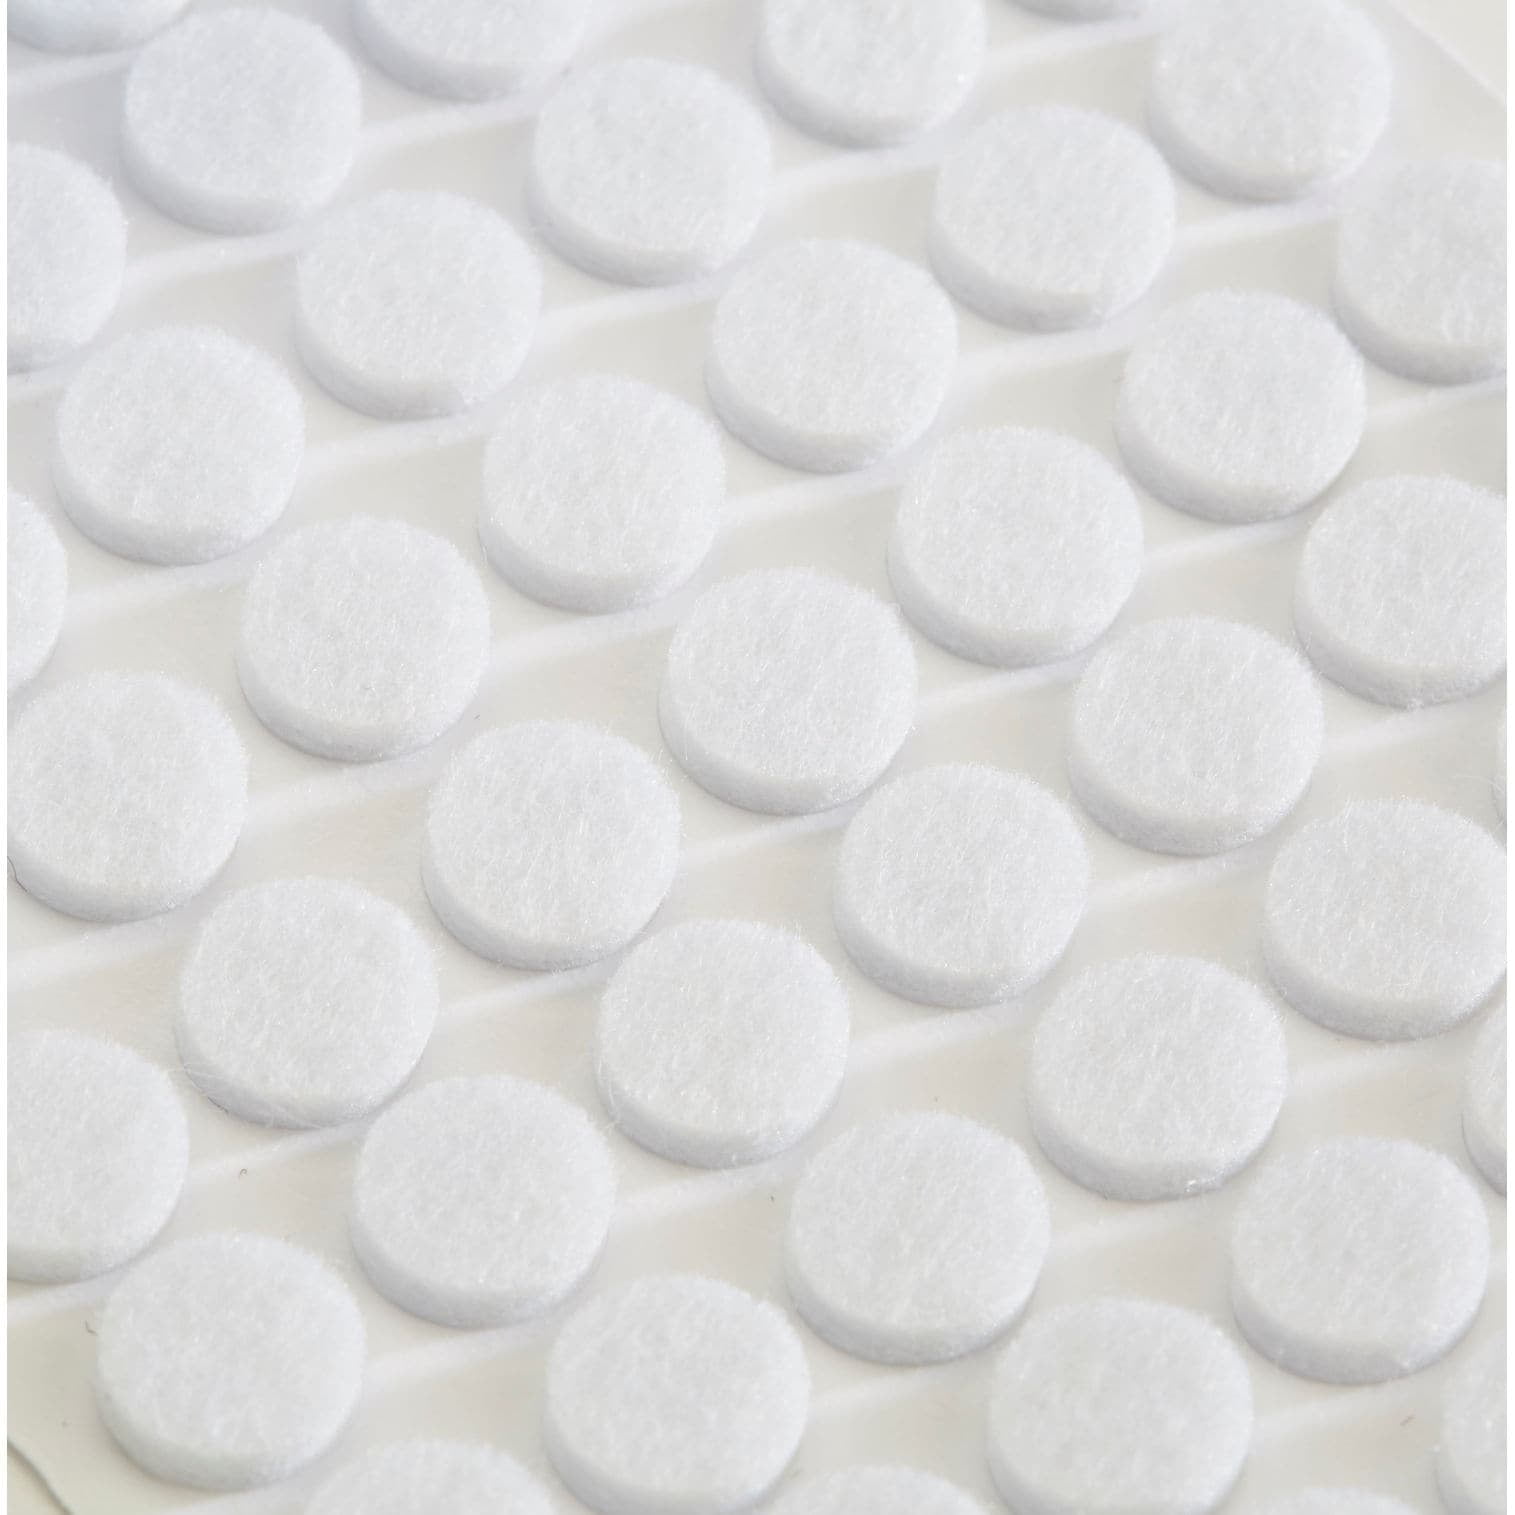 Heavy Duty Self-Adhesive Felt Pad Bumpers, 3/8 Diameter, 1/8 Height,  Round, White, Pack of 168